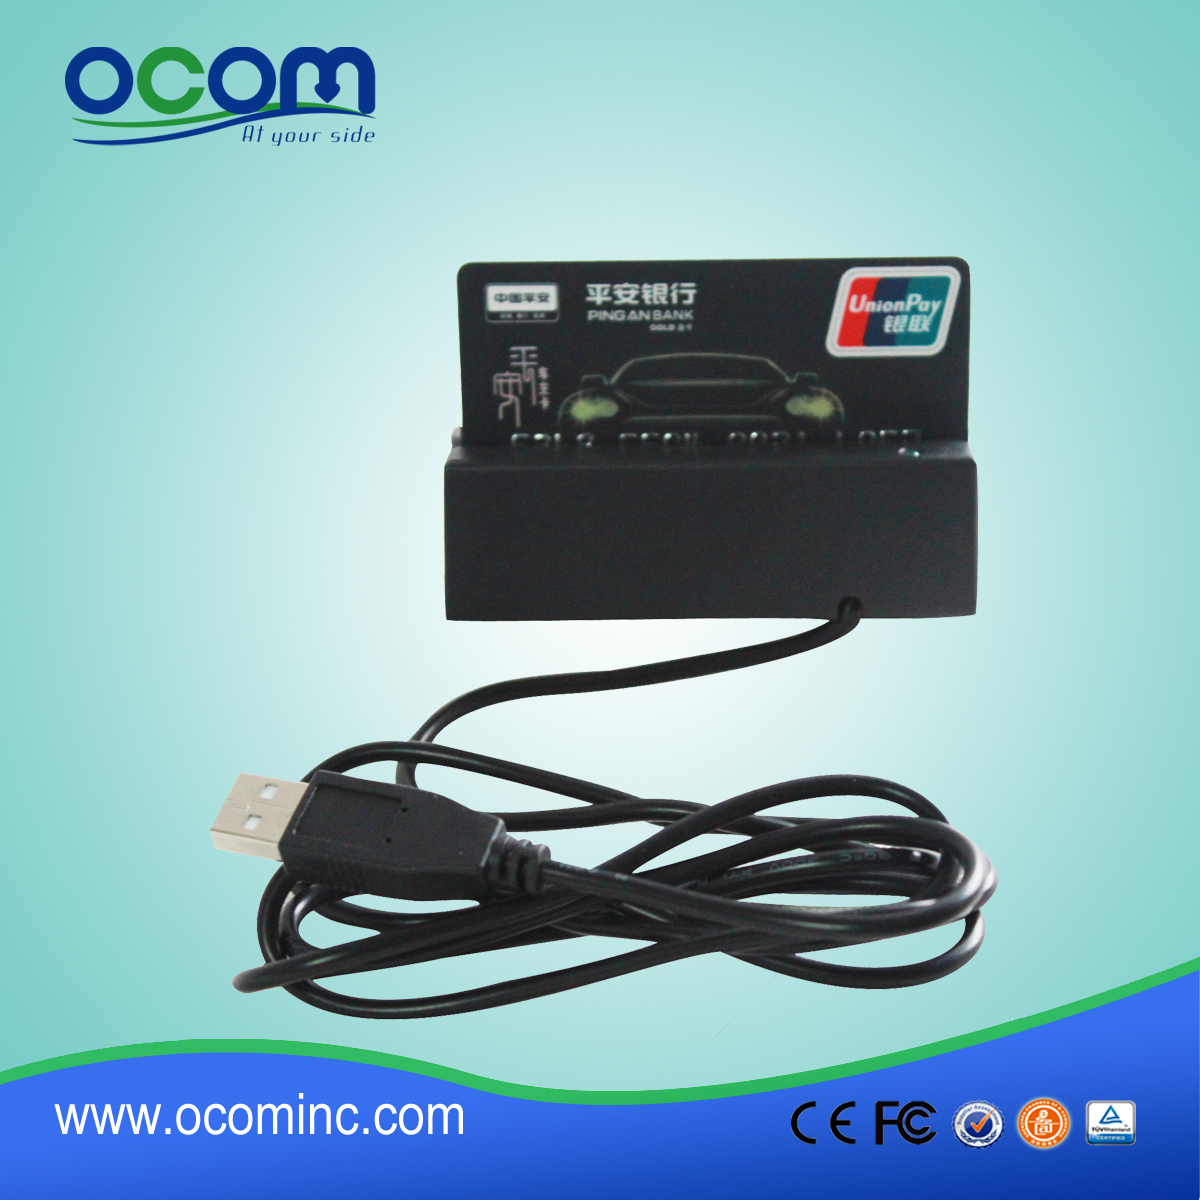 Small usb magnetic stripe card reader CR1300